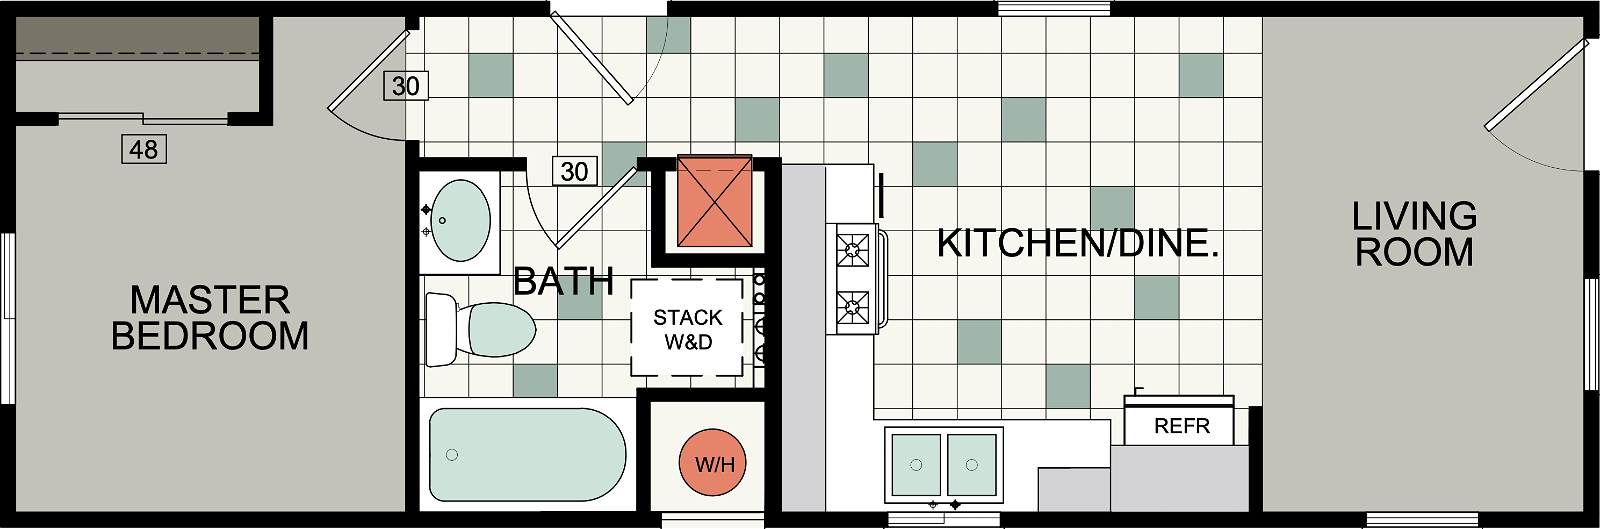 Bd 80 floor plan cropped home features